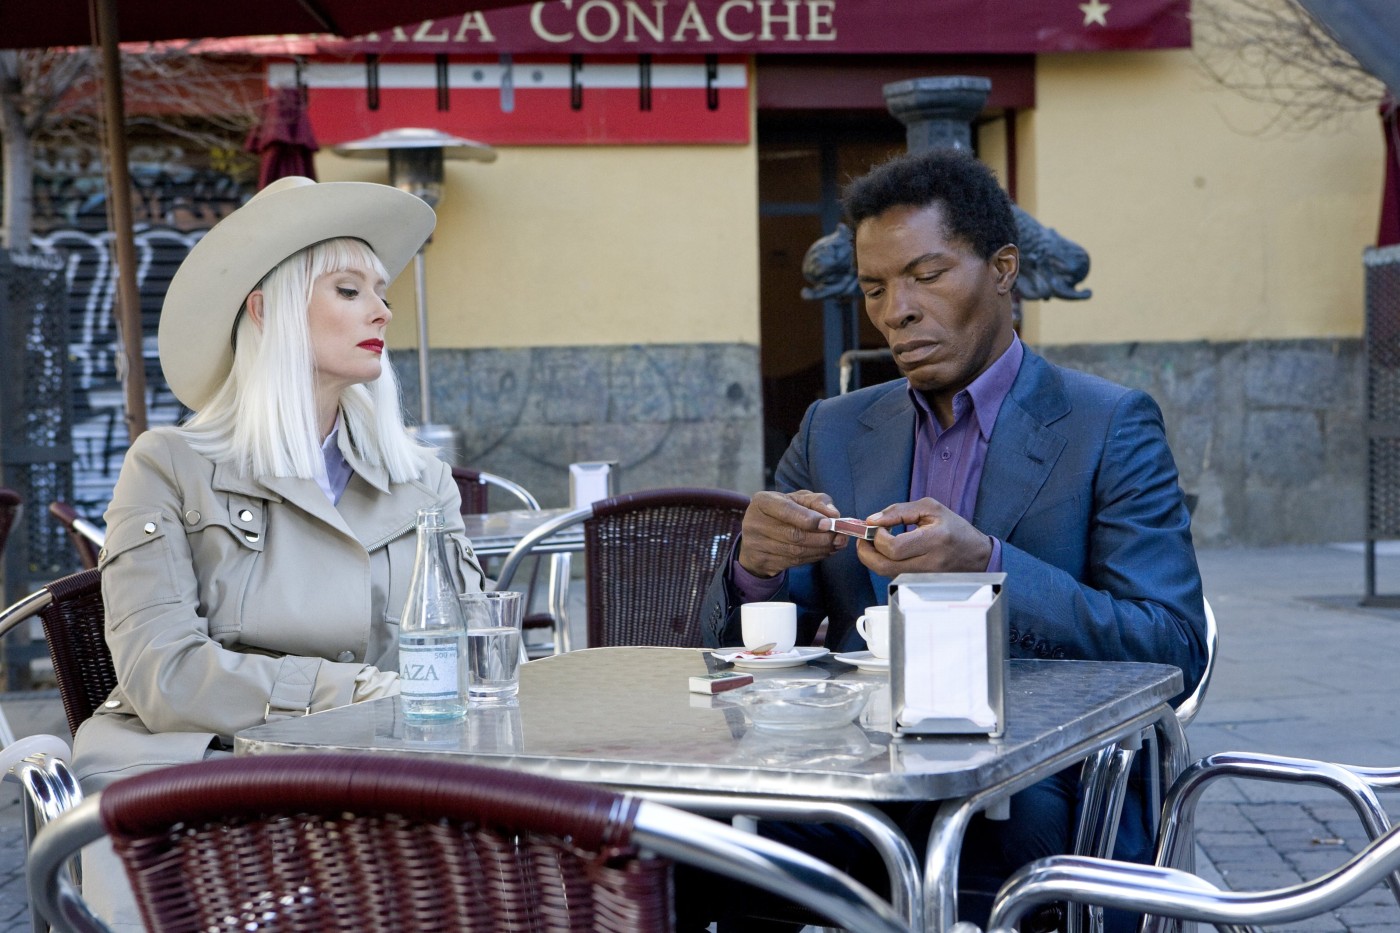 Tilda Swinton sits down to join Isaach De Bankole over an espresso in The Limits of Control (2009)